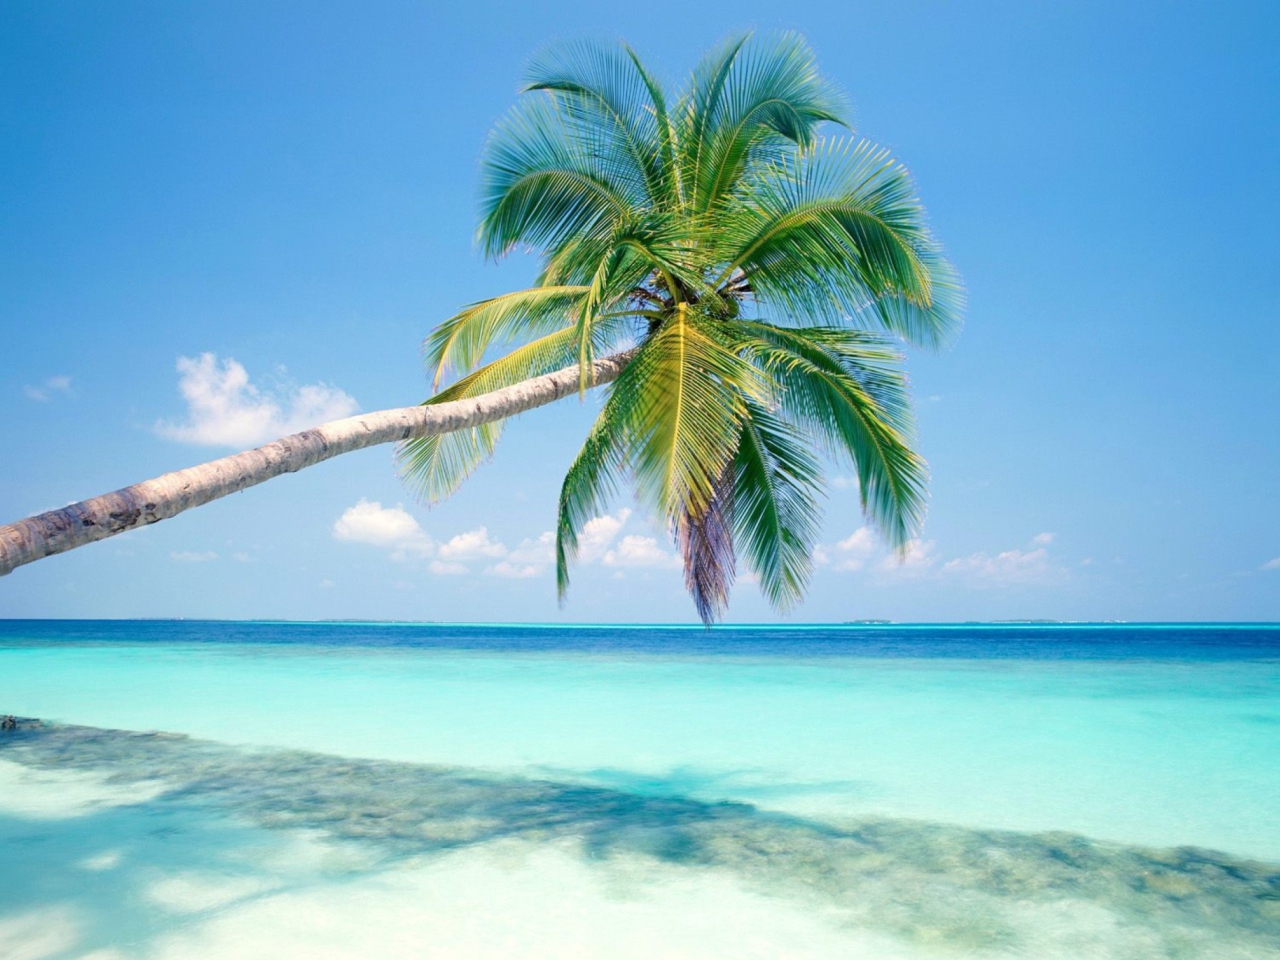 Blue Shore And Palm Tree wallpaper 1280x960